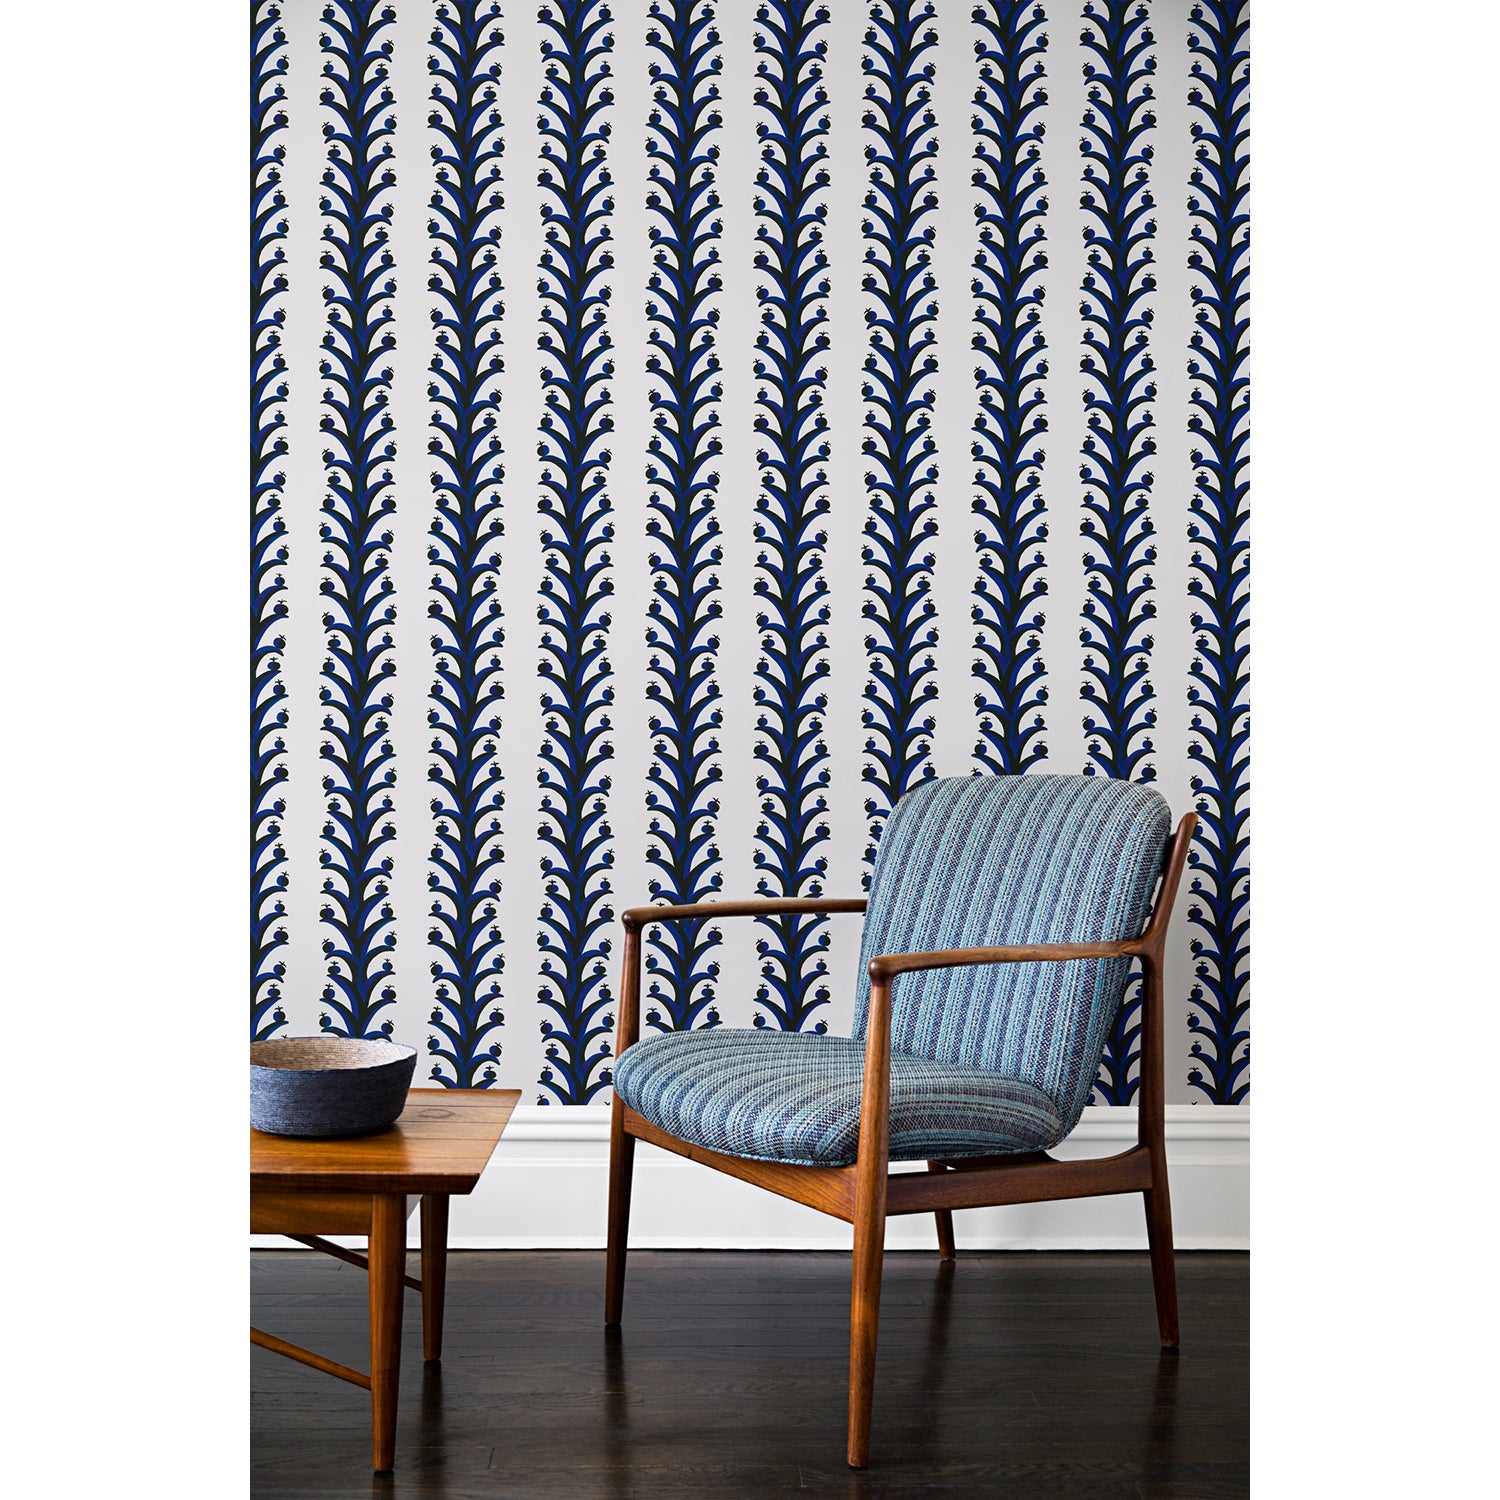 An armchair and coffee table in front of a wall papered in repeating horizontal stripes of black and blue branches and fruit on a white background.